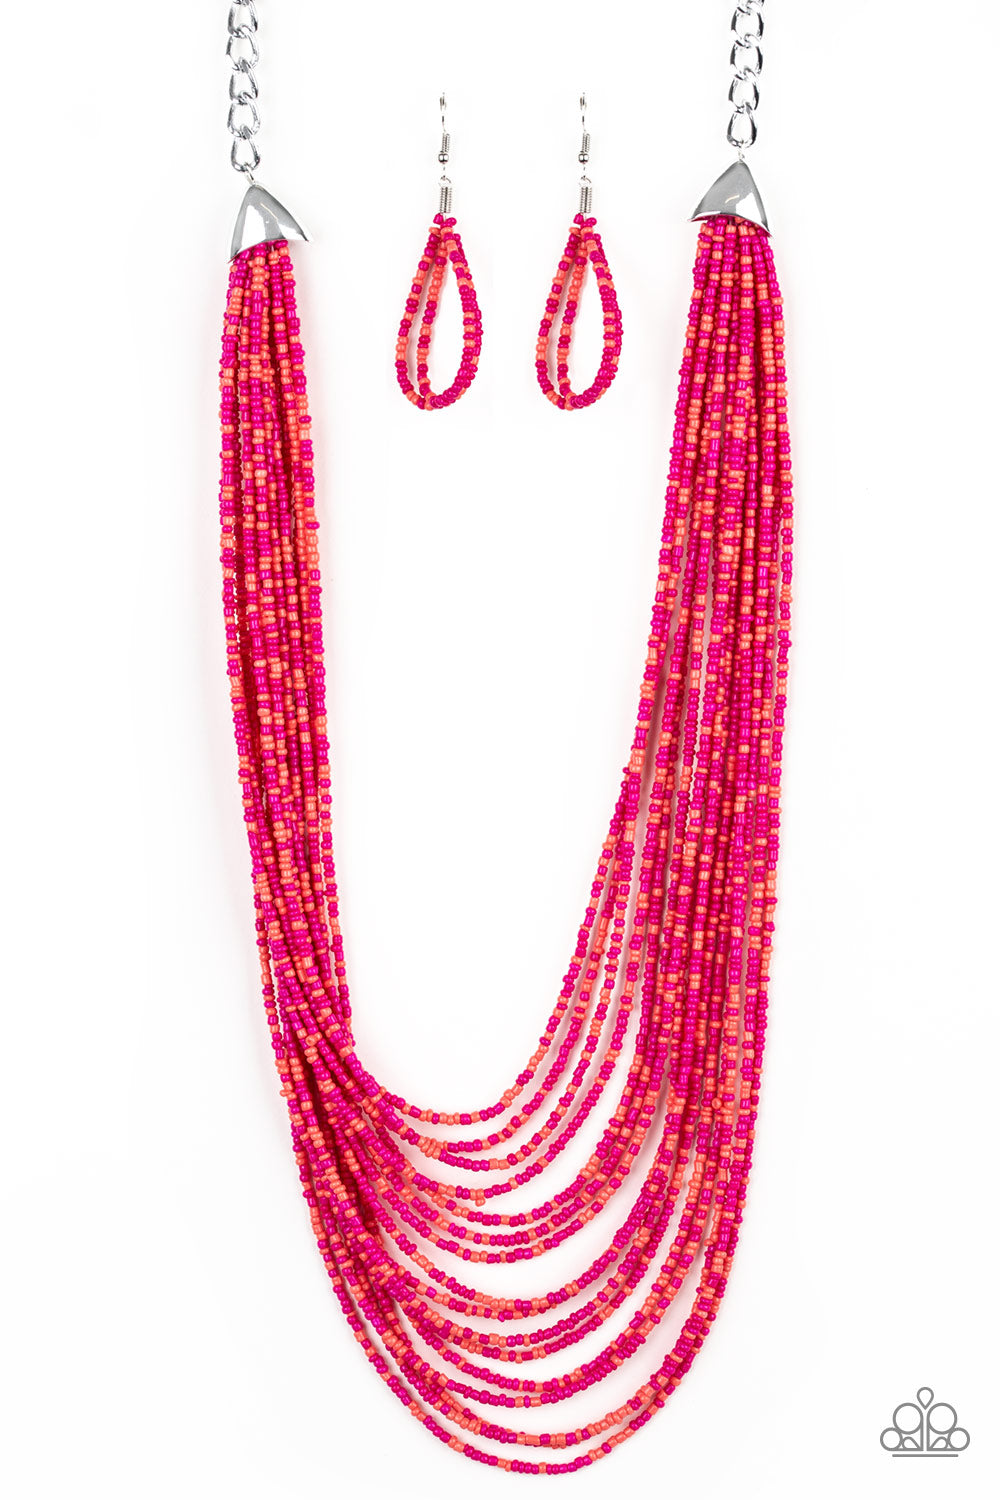 Peacefully Pacific Multi Paparazzi Necklaces Cashmere Pink Jewels - Cashmere Pink Jewels & Accessories, Cashmere Pink Jewels & Accessories - Paparazzi